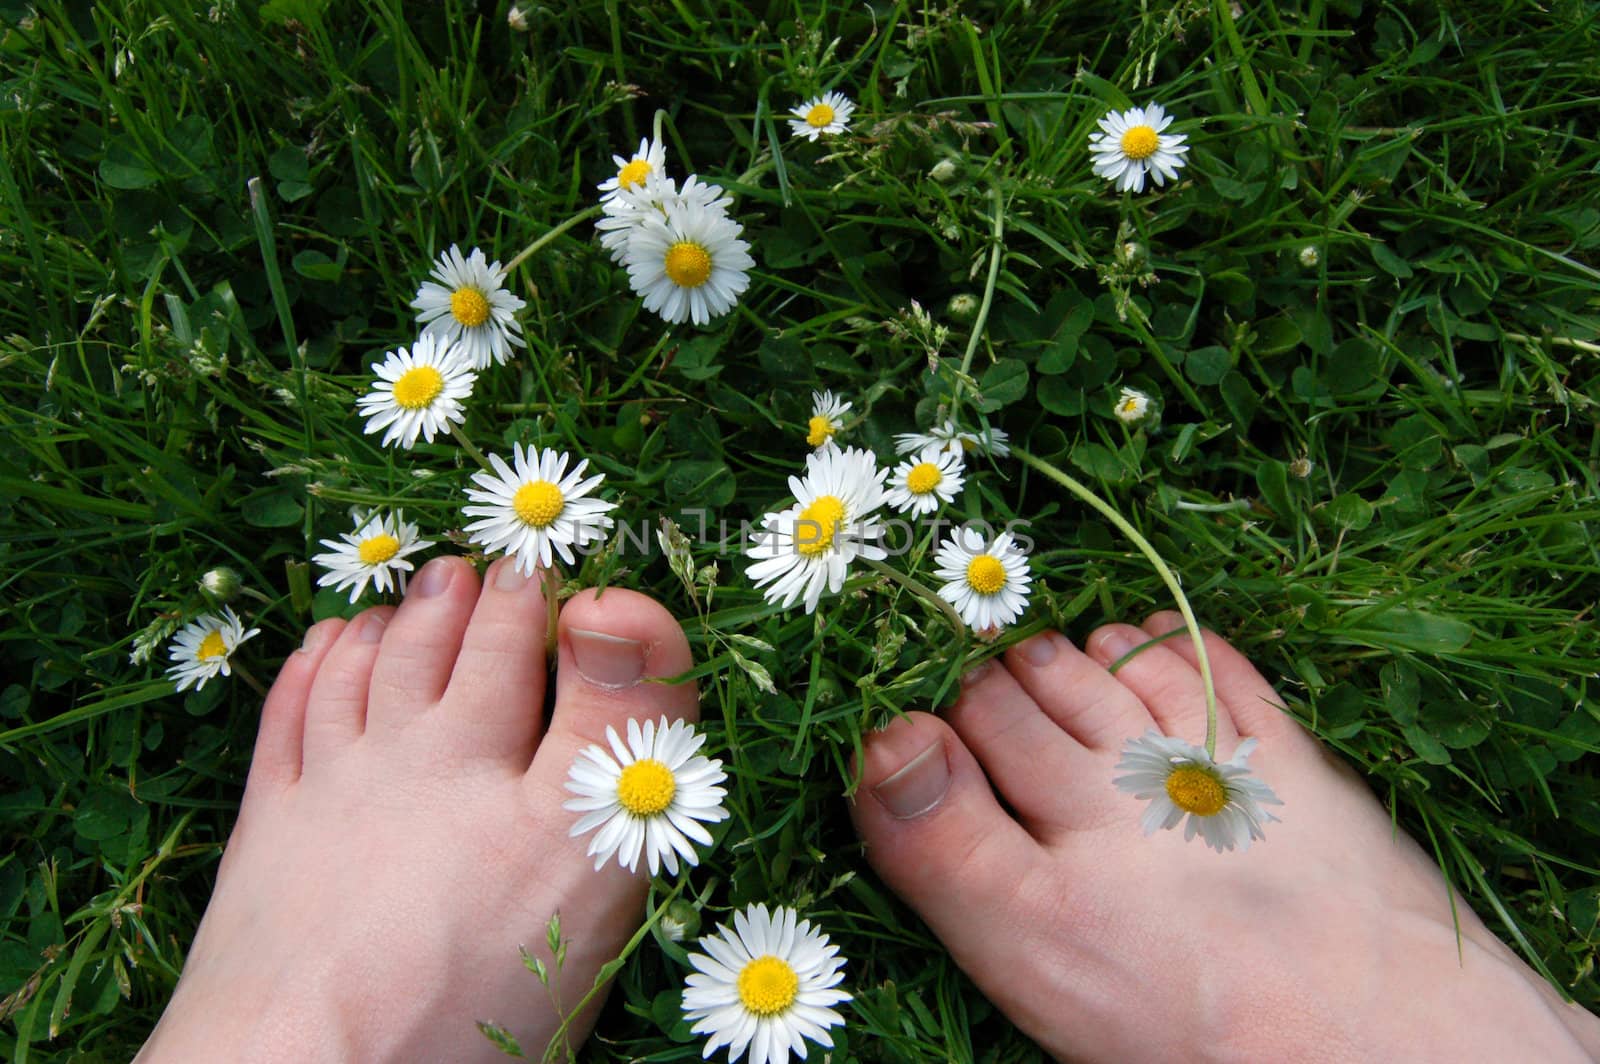 Two bare feet among daisies, clover and grass